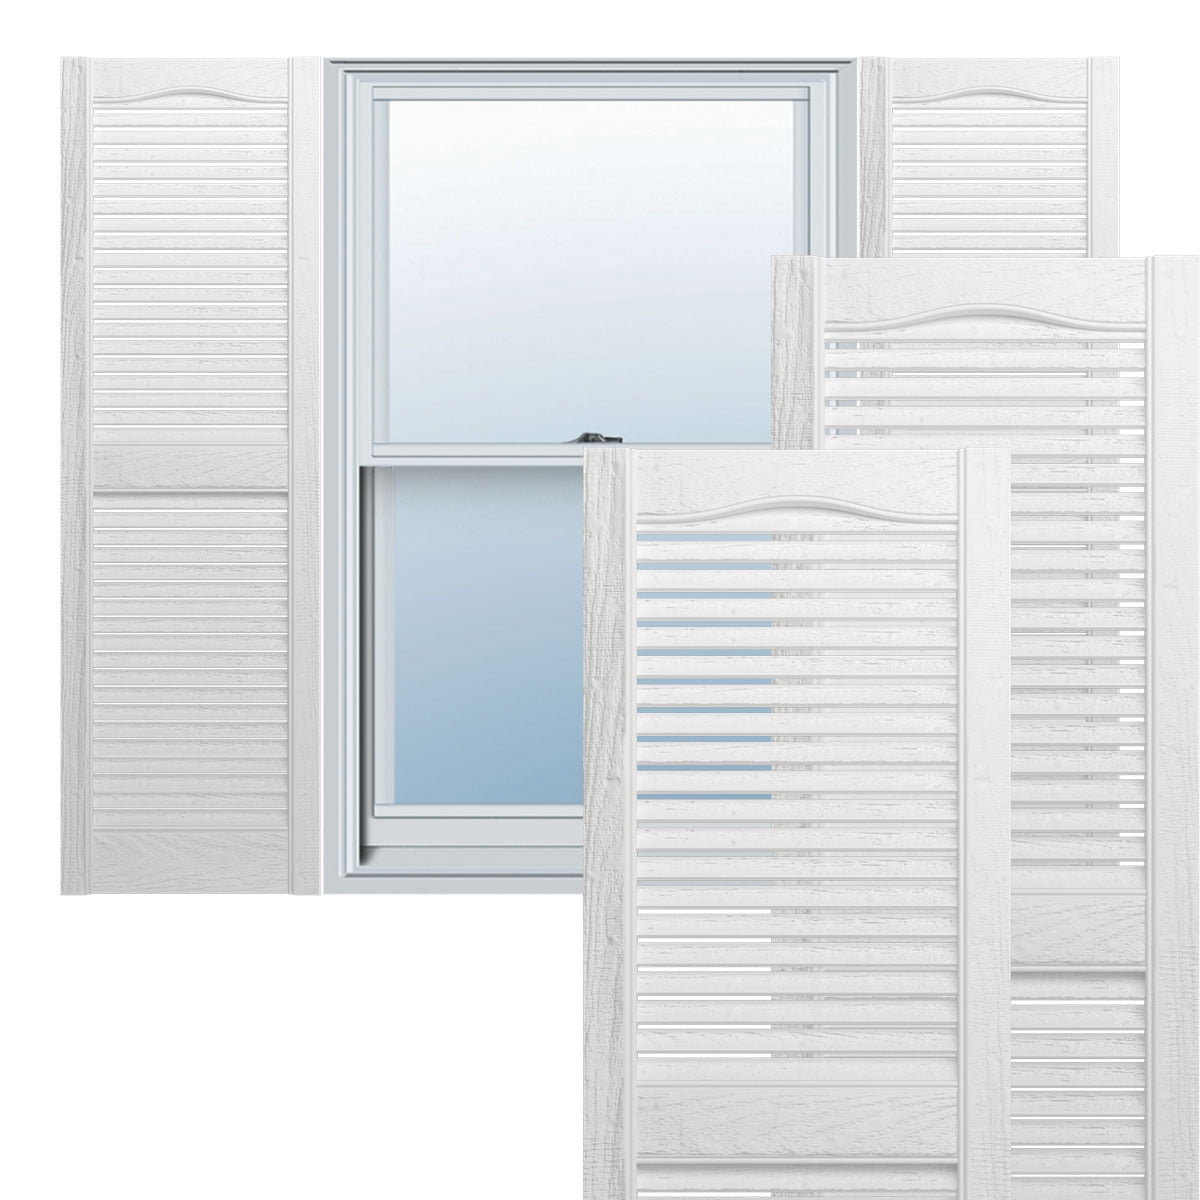 Window Nominal Edge x 55 in White Louvered Vinyl Exterior Shutters Pair 15 in 